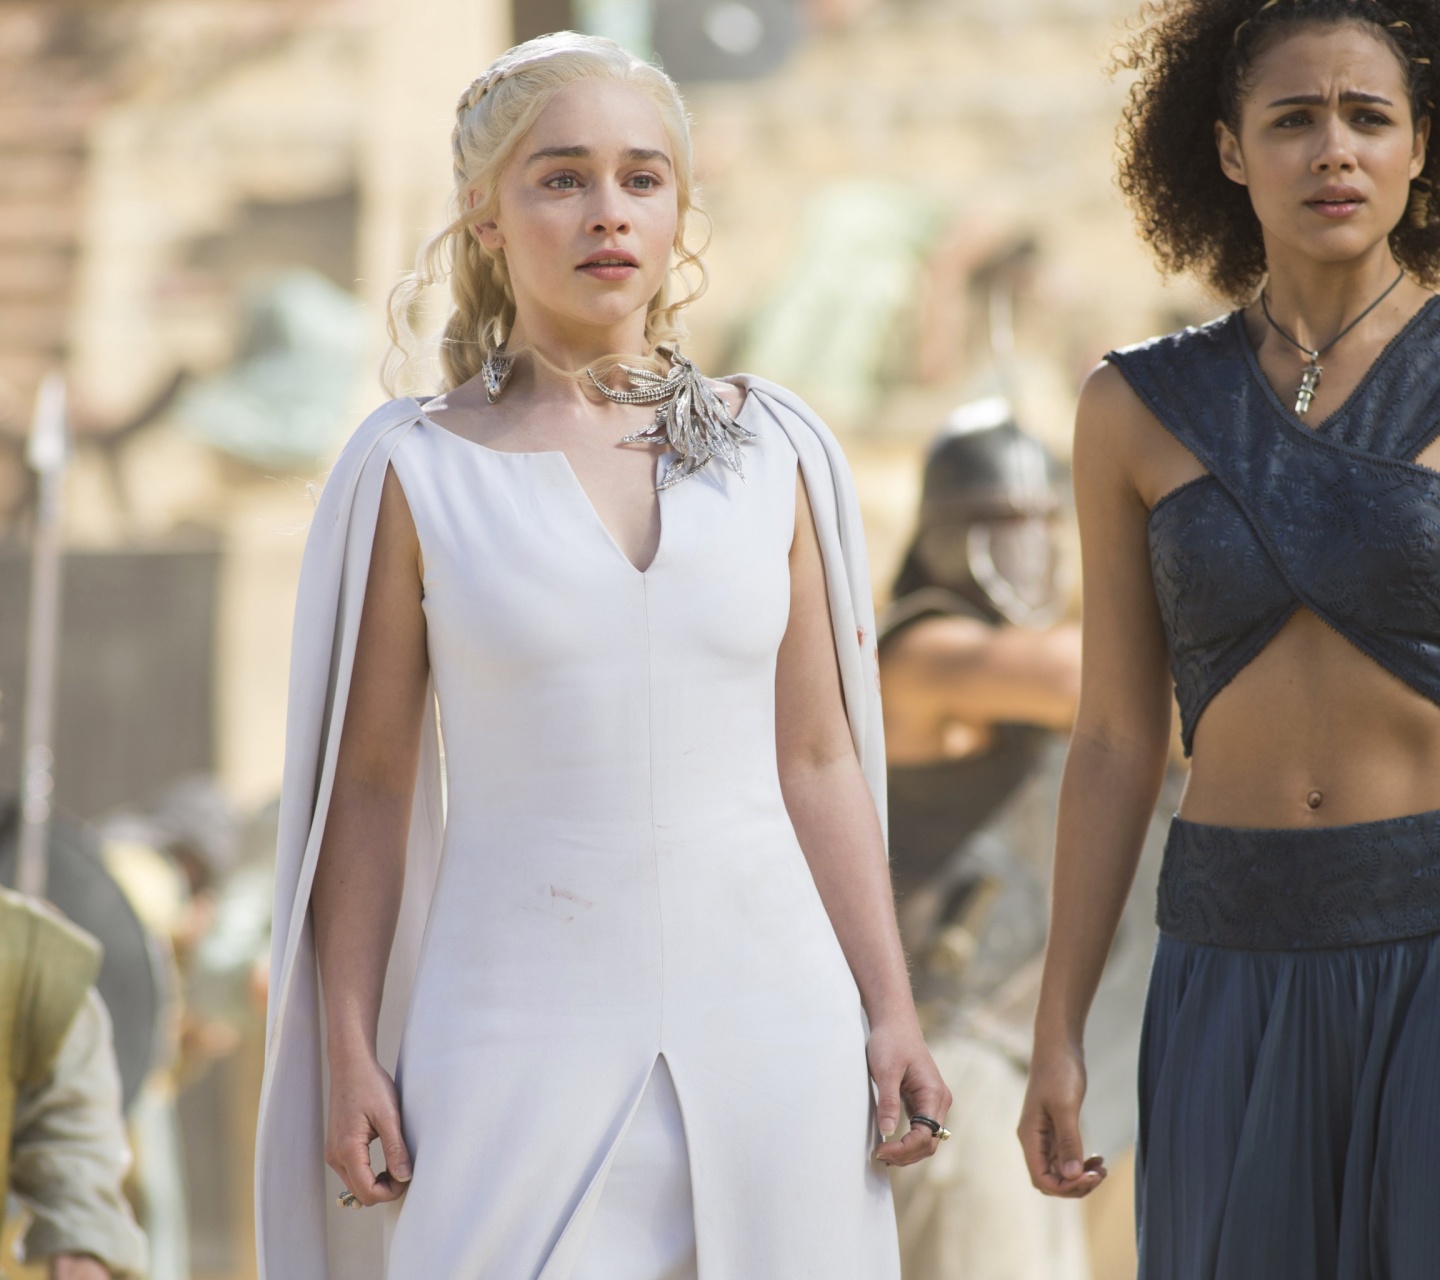 Game Of Thrones Emilia Clarke and Nathalie Emmanuel as Missandei wallpaper 1440x1280